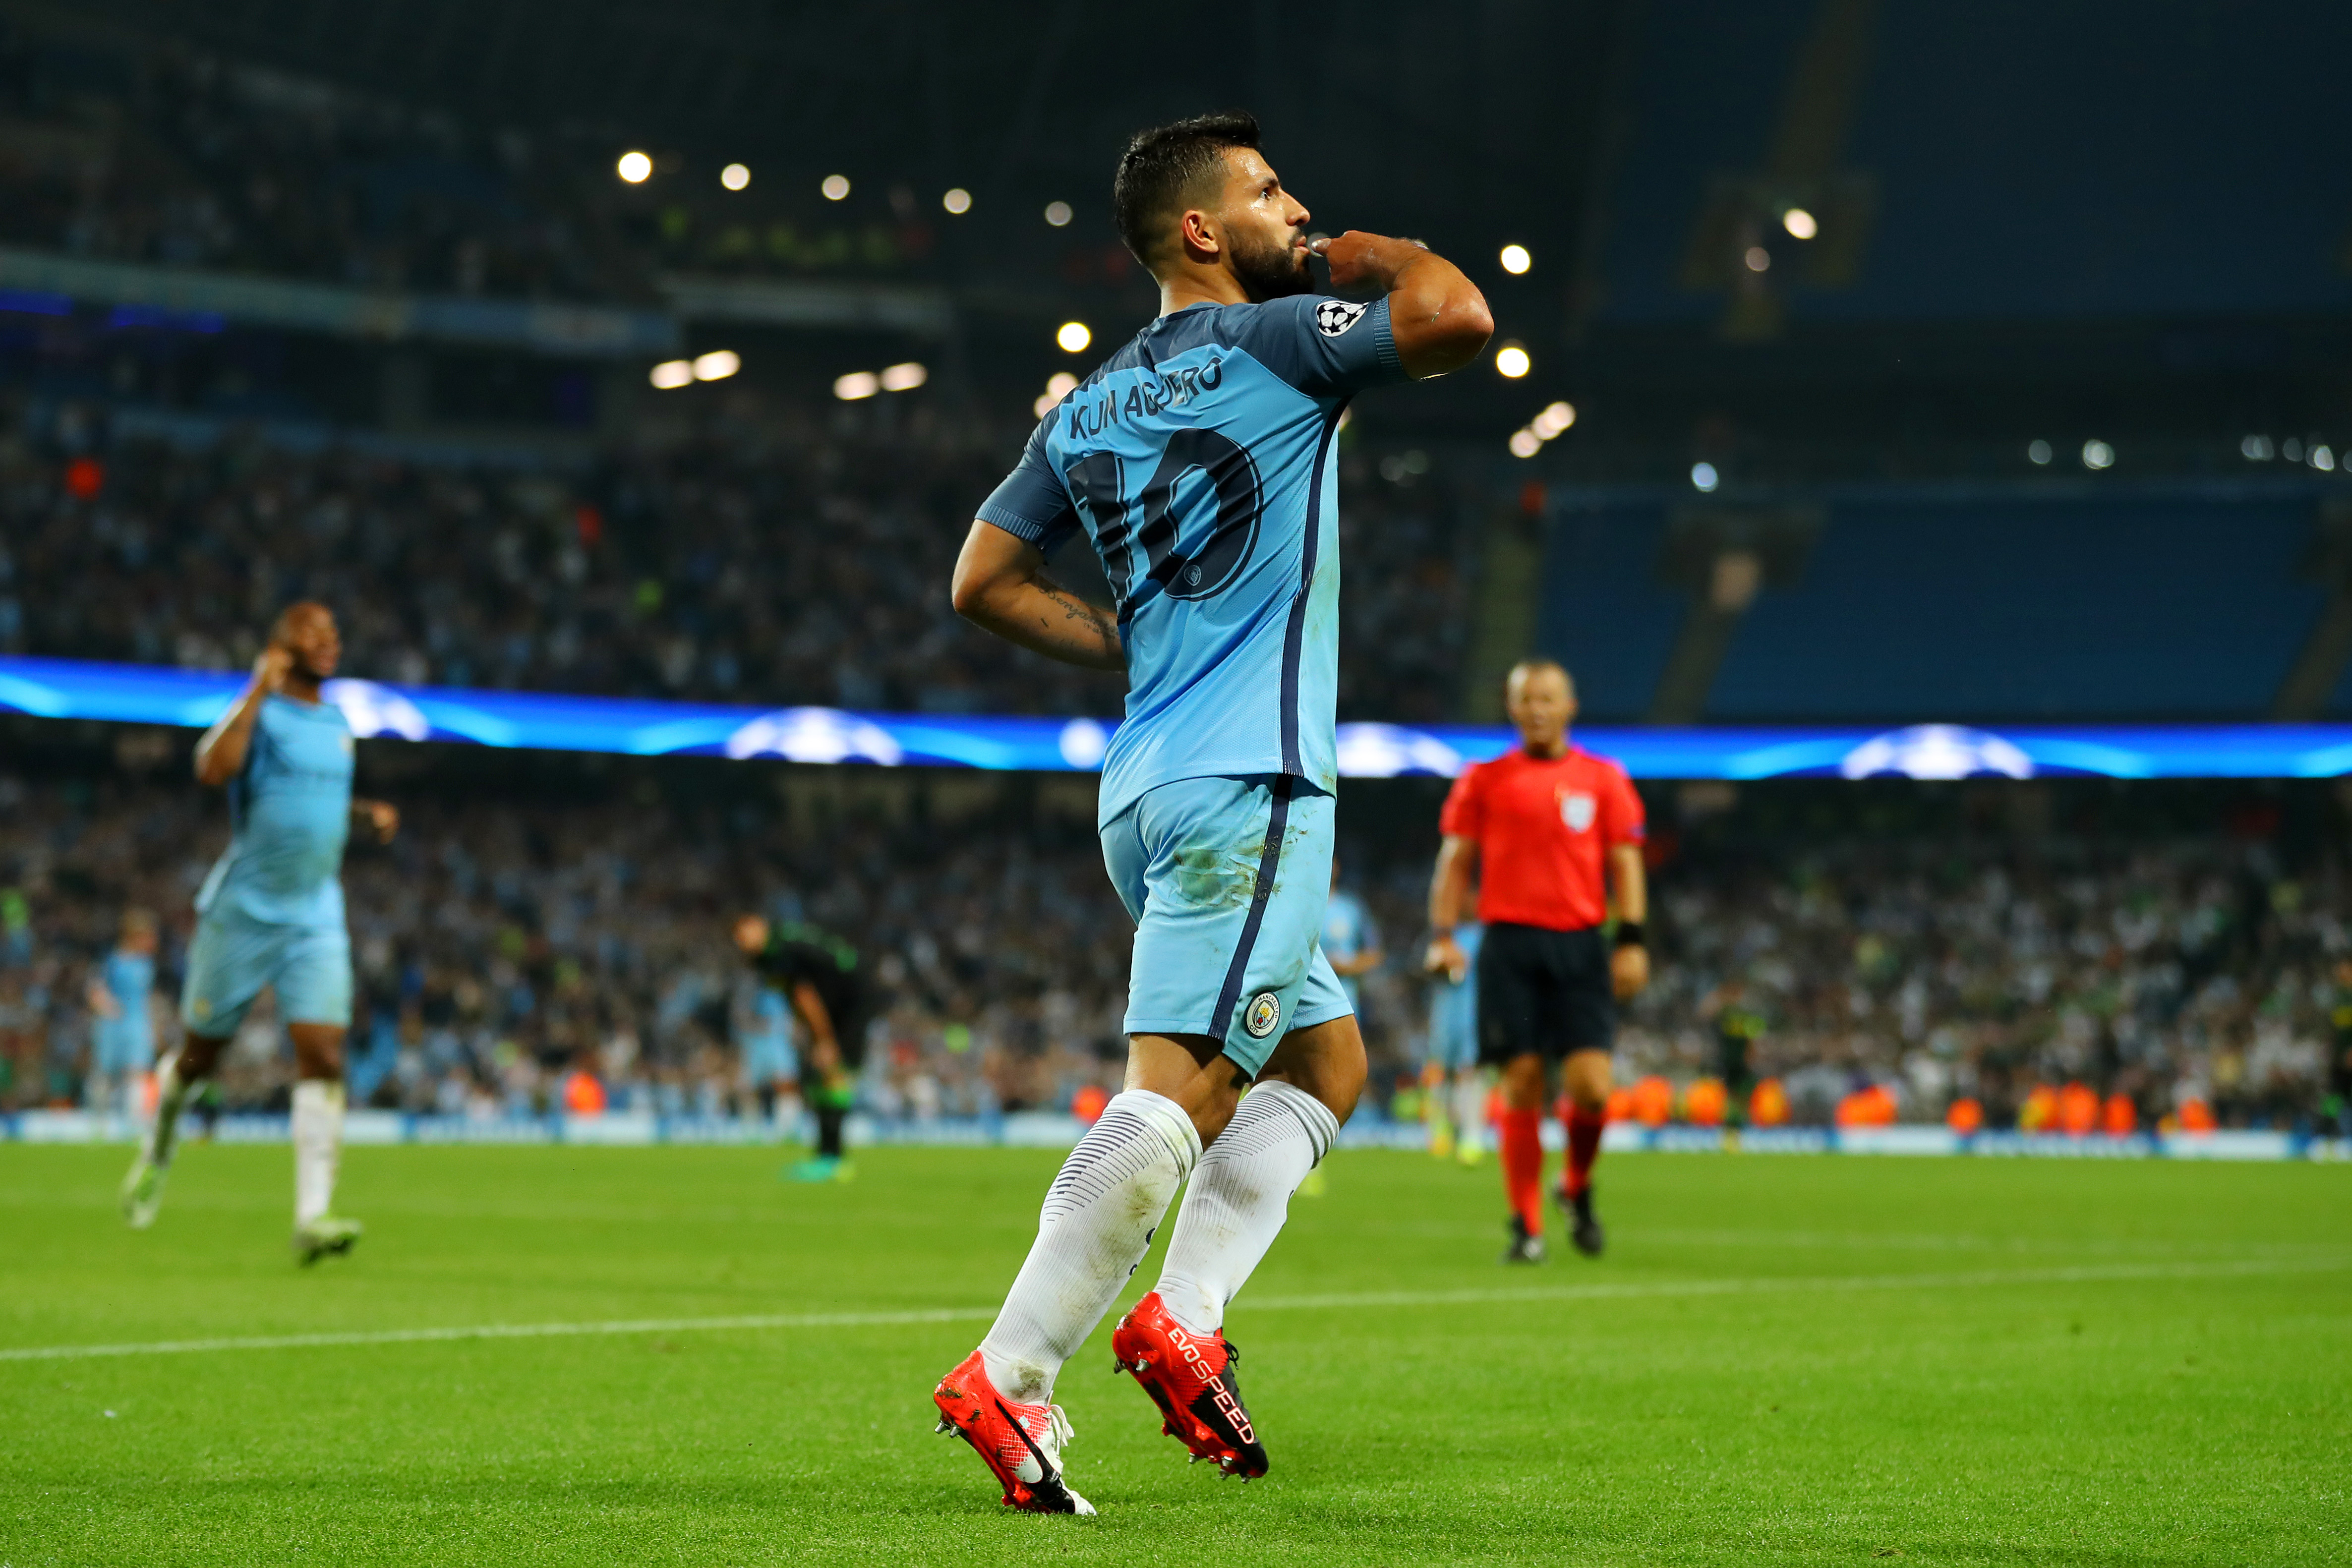 MANCHESTER, ENGLAND - SEPTEMBER 14:  Sergio Aguero of Manchester City celebrates his third during the UEFA Champions League match between Manchester City FC and VfL Borussia Moenchengladbach at Etihad Stadium on September 14, 2016 in Manchester, England.  (Photo by Richard Heathcote/Getty Images)